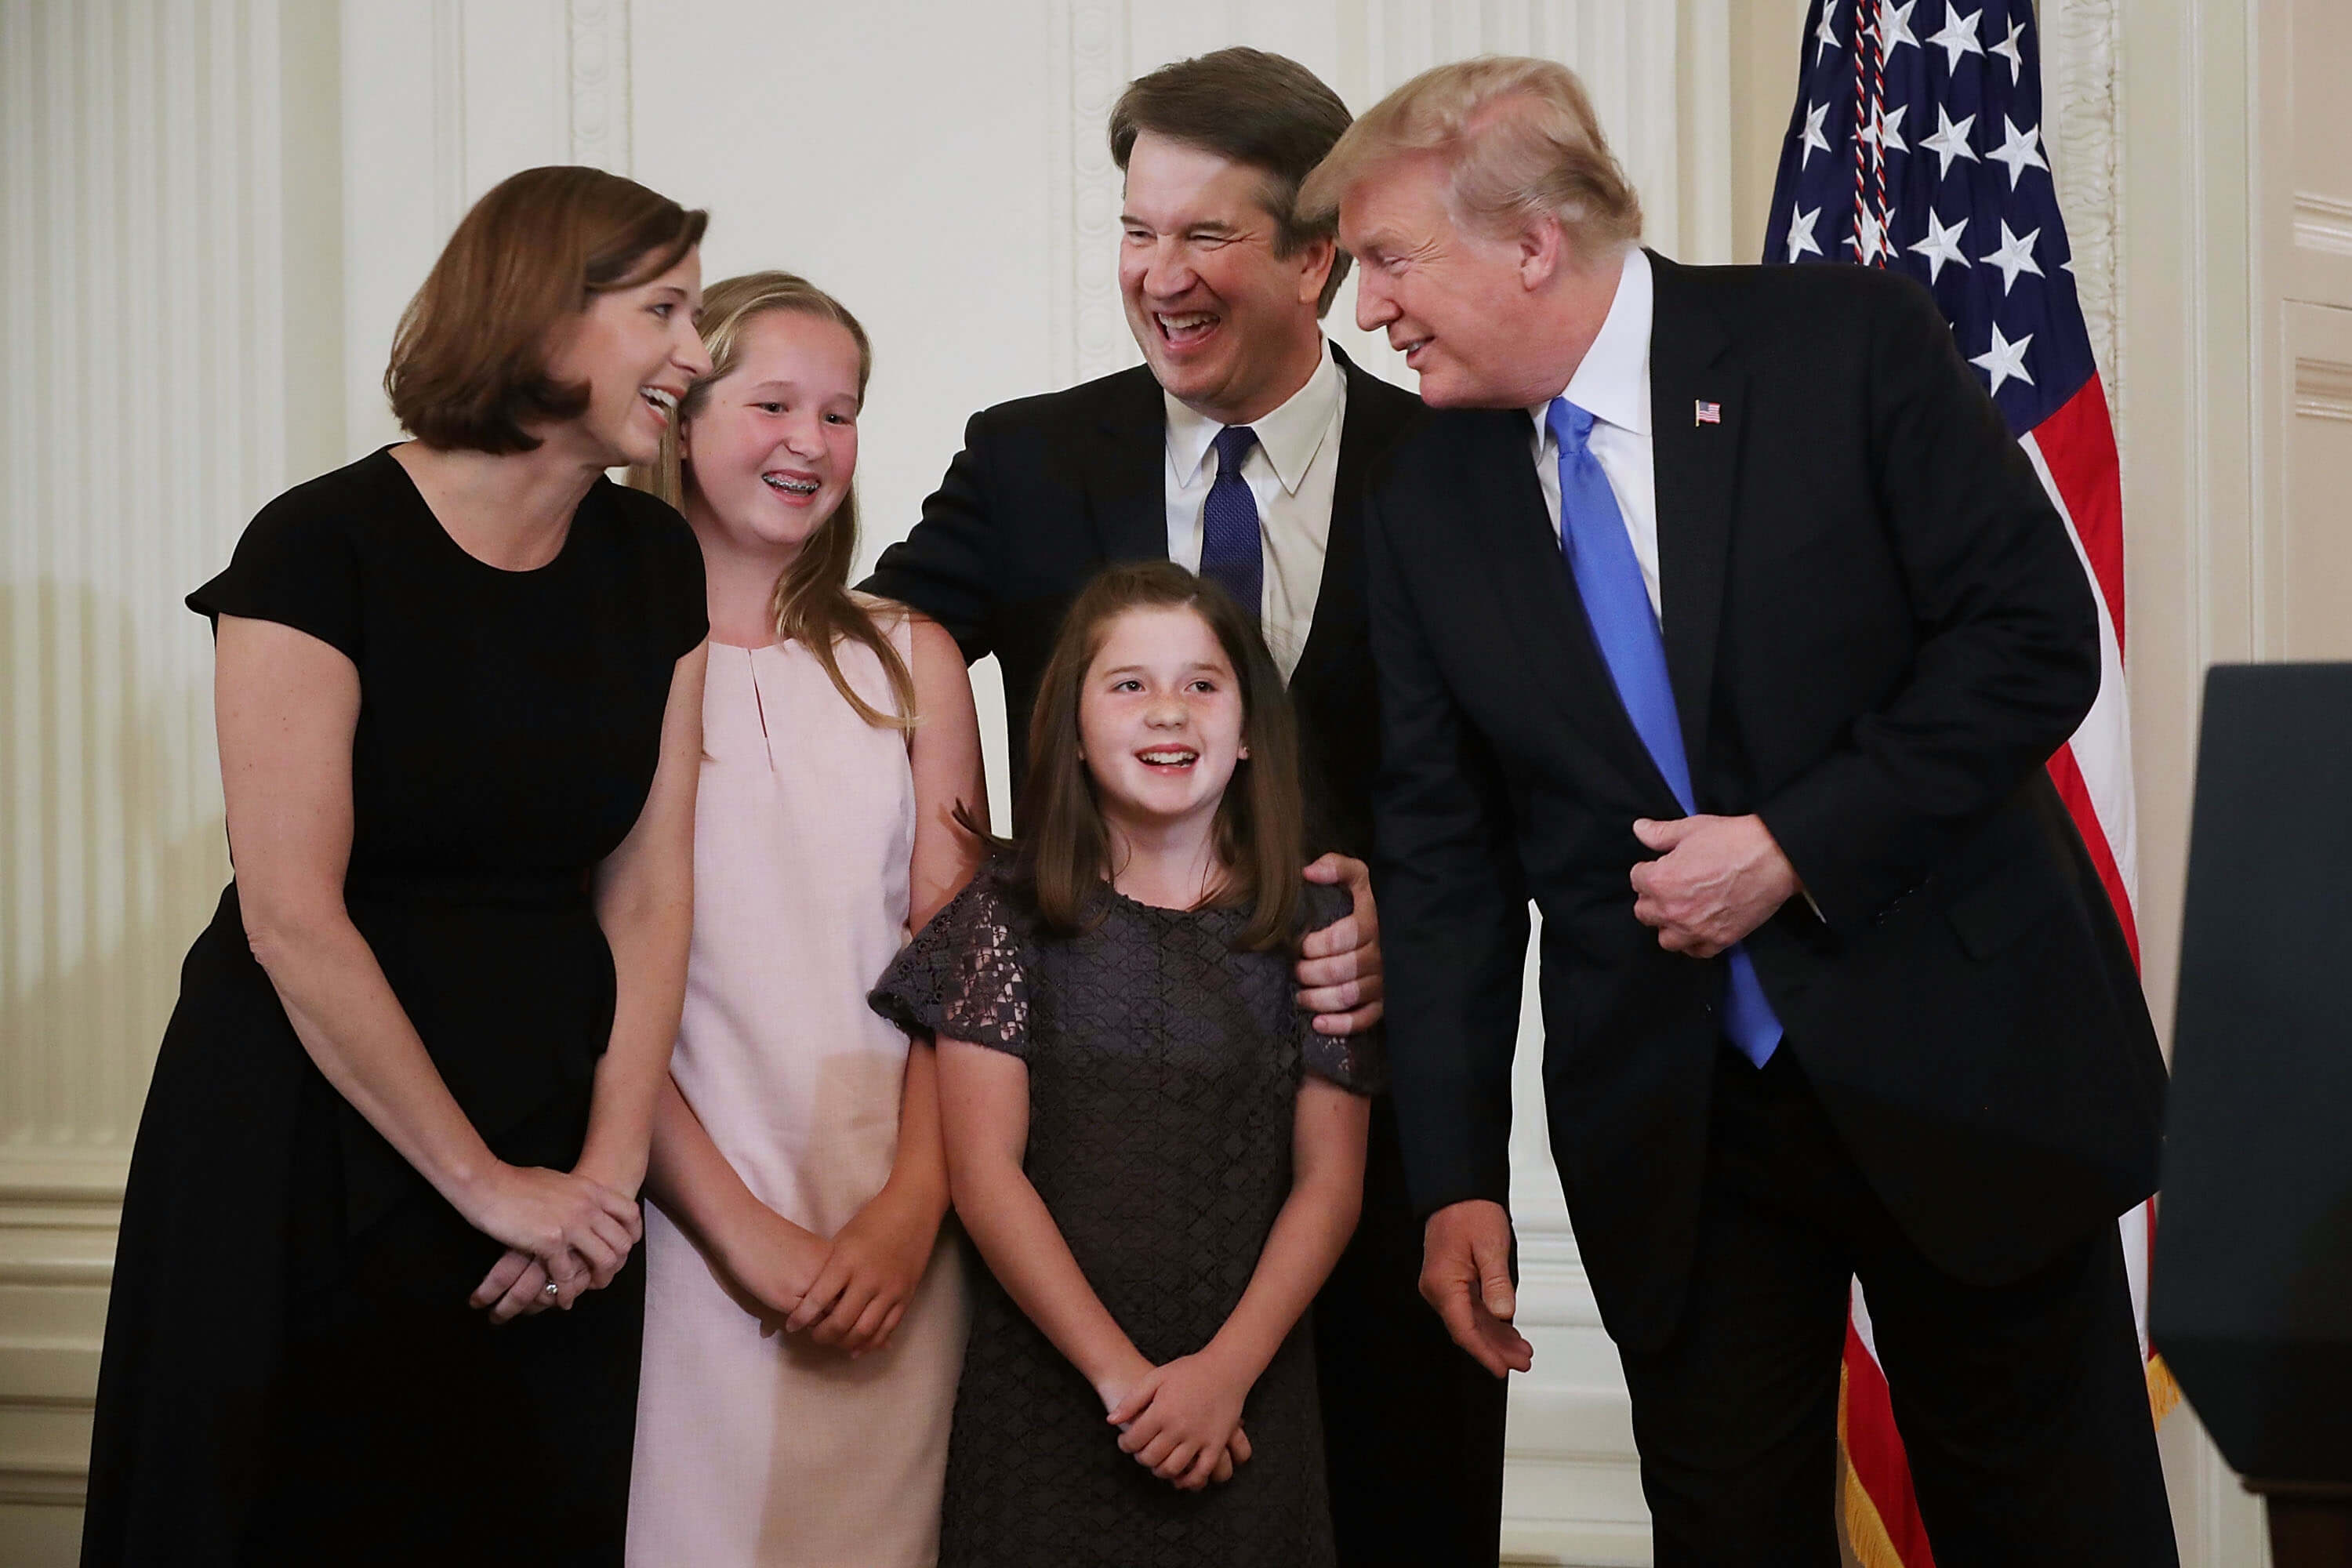 U.S. President Donald Trump (R), Judge Brett M. Kavanaugh (2nd R), his wife Ashley Estes Kavanaugh and their daughters, Margaret and Liza, share a laugh after Trump announced the judge as his nominee to the United States Supreme Court during an event in the East Room of the White House July 9, 2018 in Washington, DC.